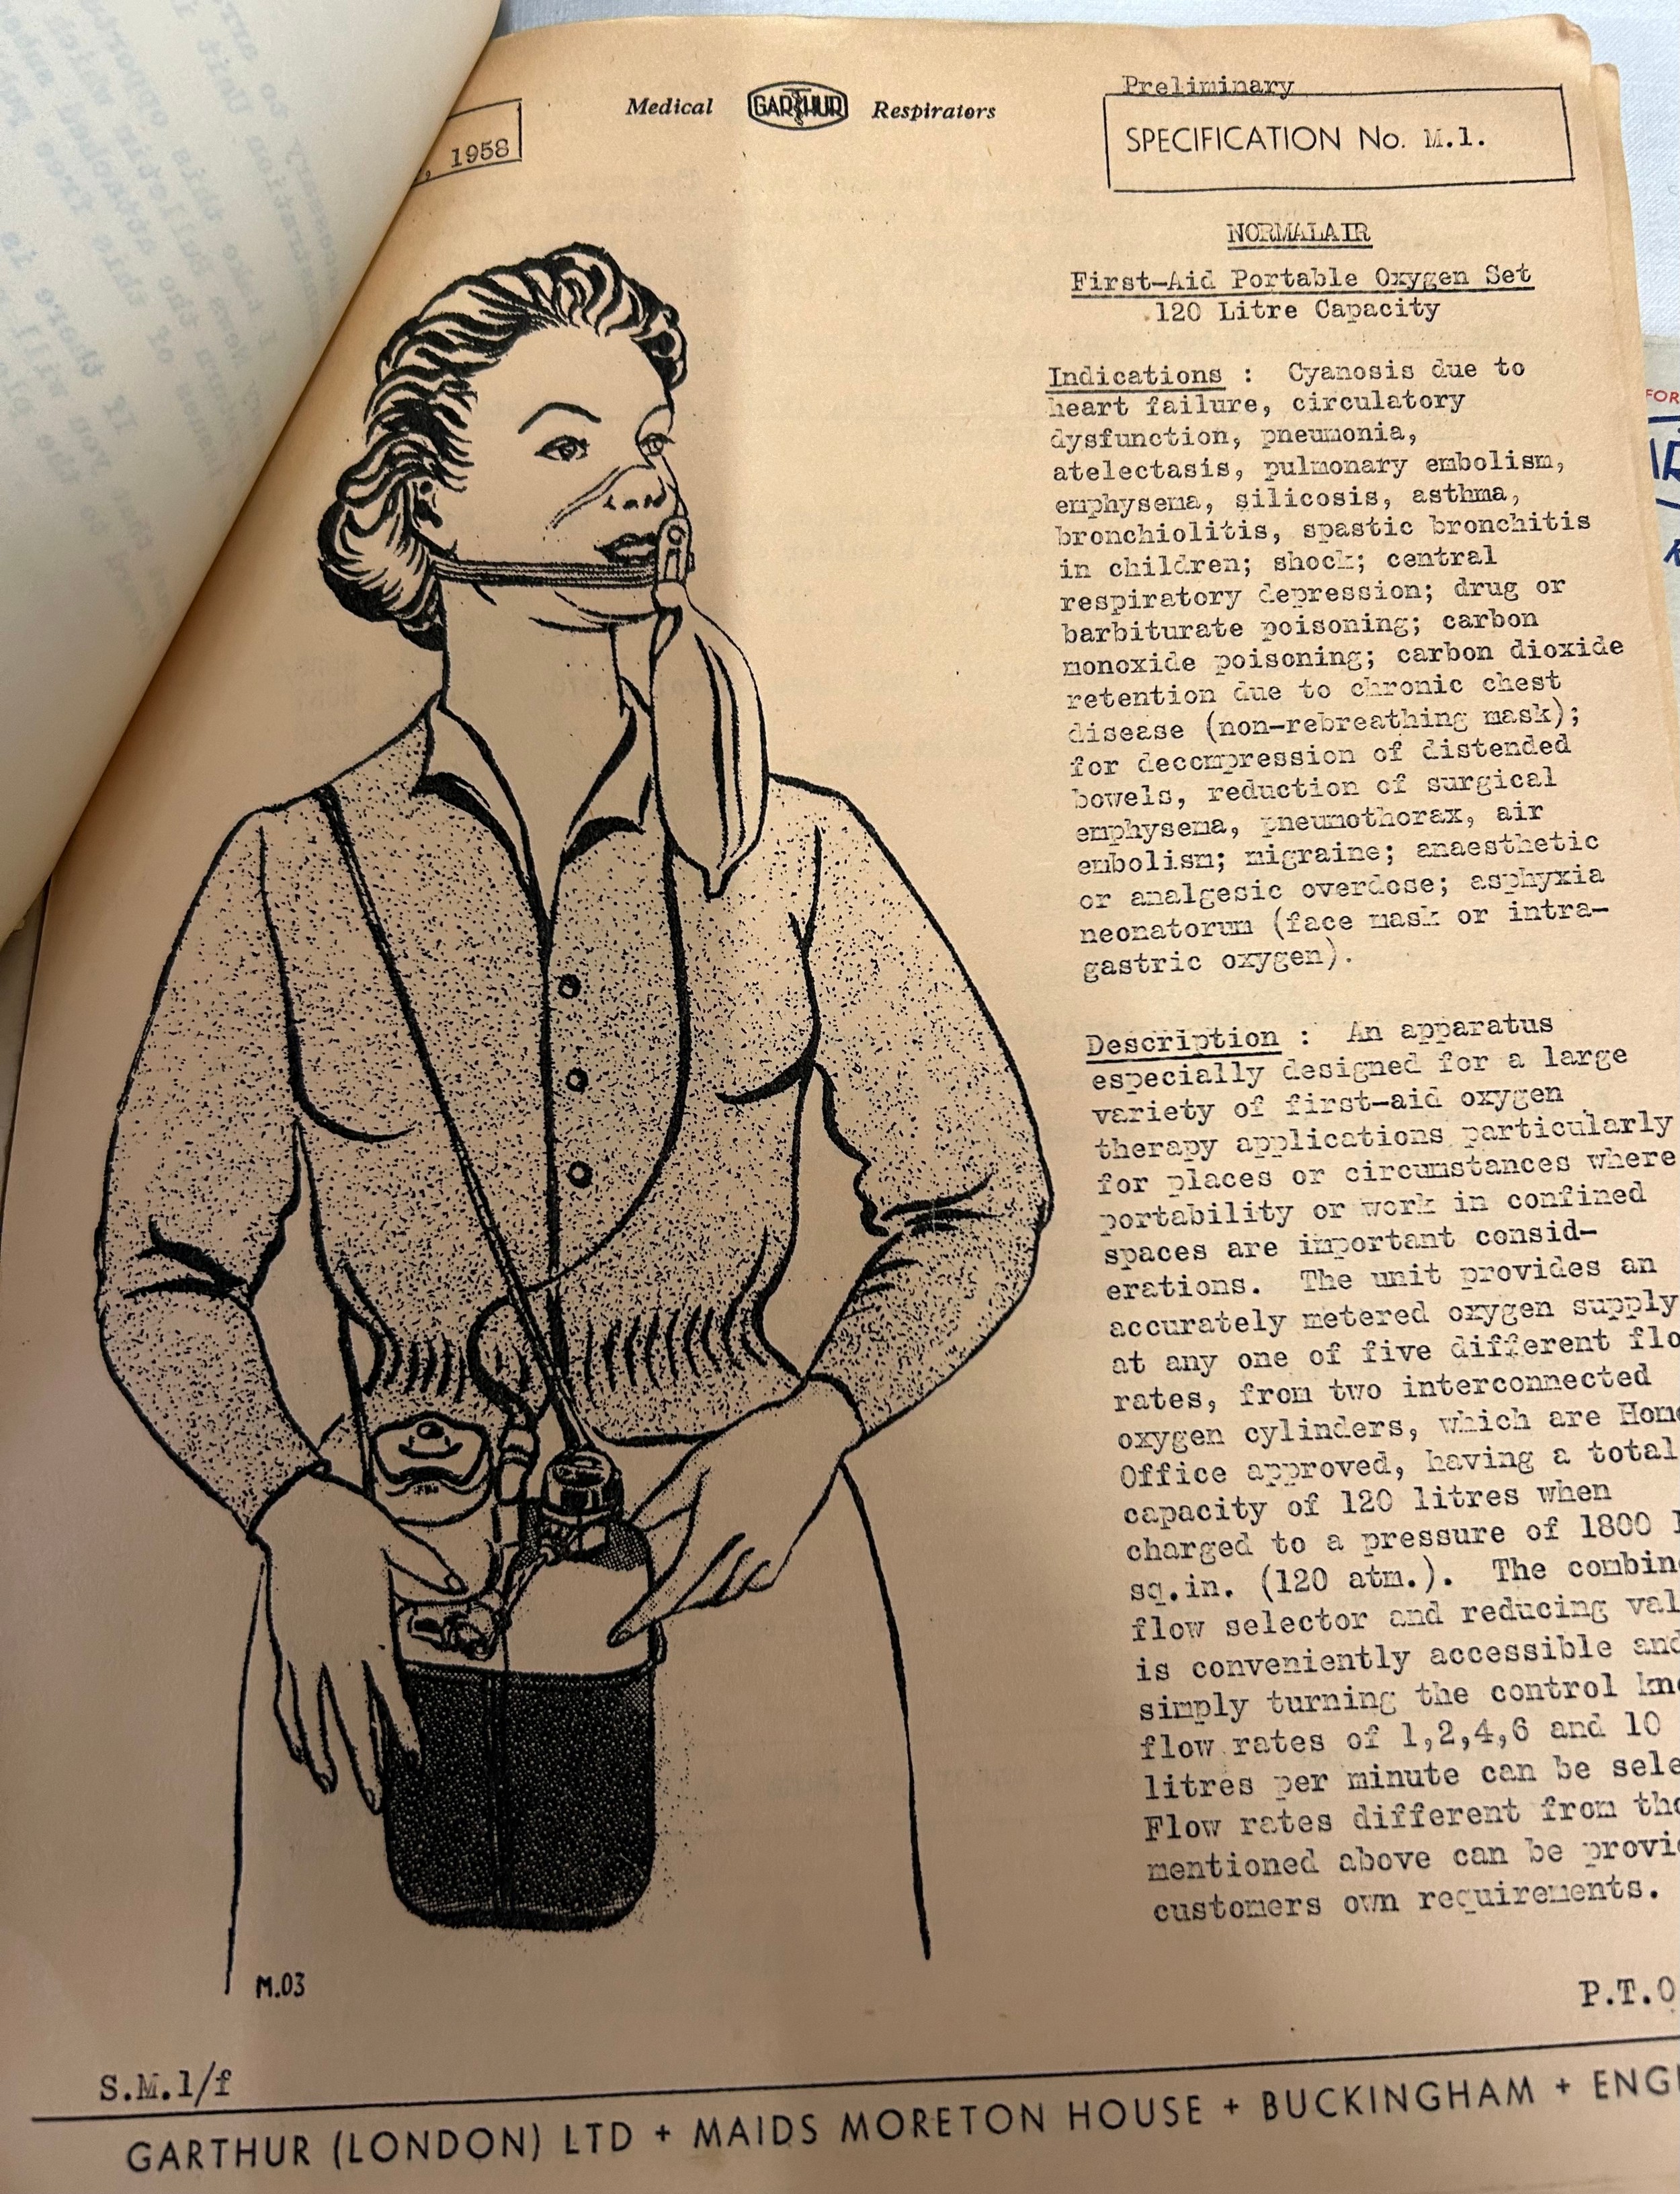 A 1959 Garthur Normalair First-Aid portable oxygen resuscitation equipment set in a Billings & - Image 4 of 7